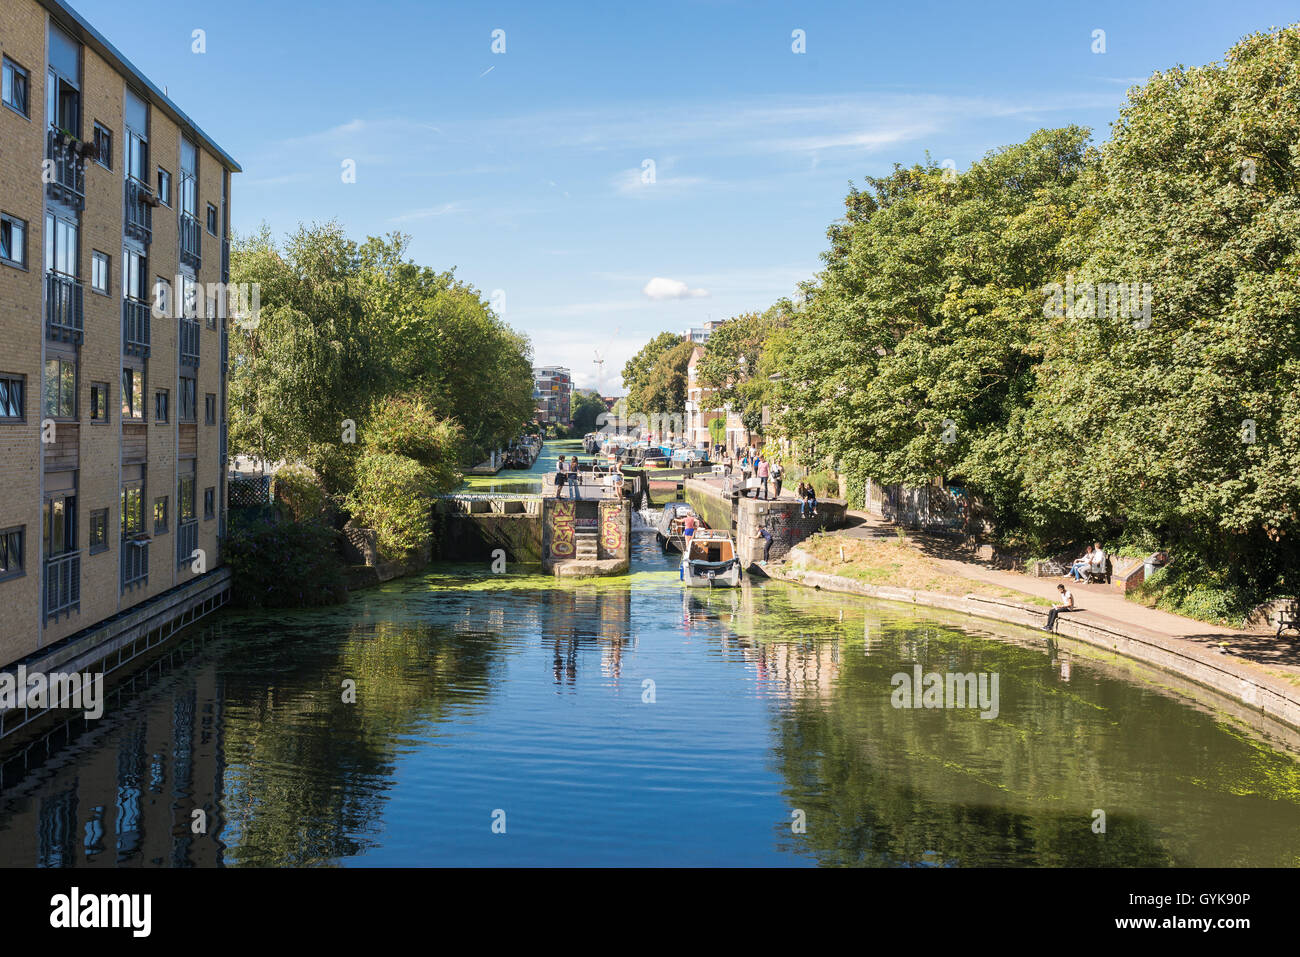 View of Regent's canal from a bridge near Broadway market with boats and people walking next to it . Stock Photo